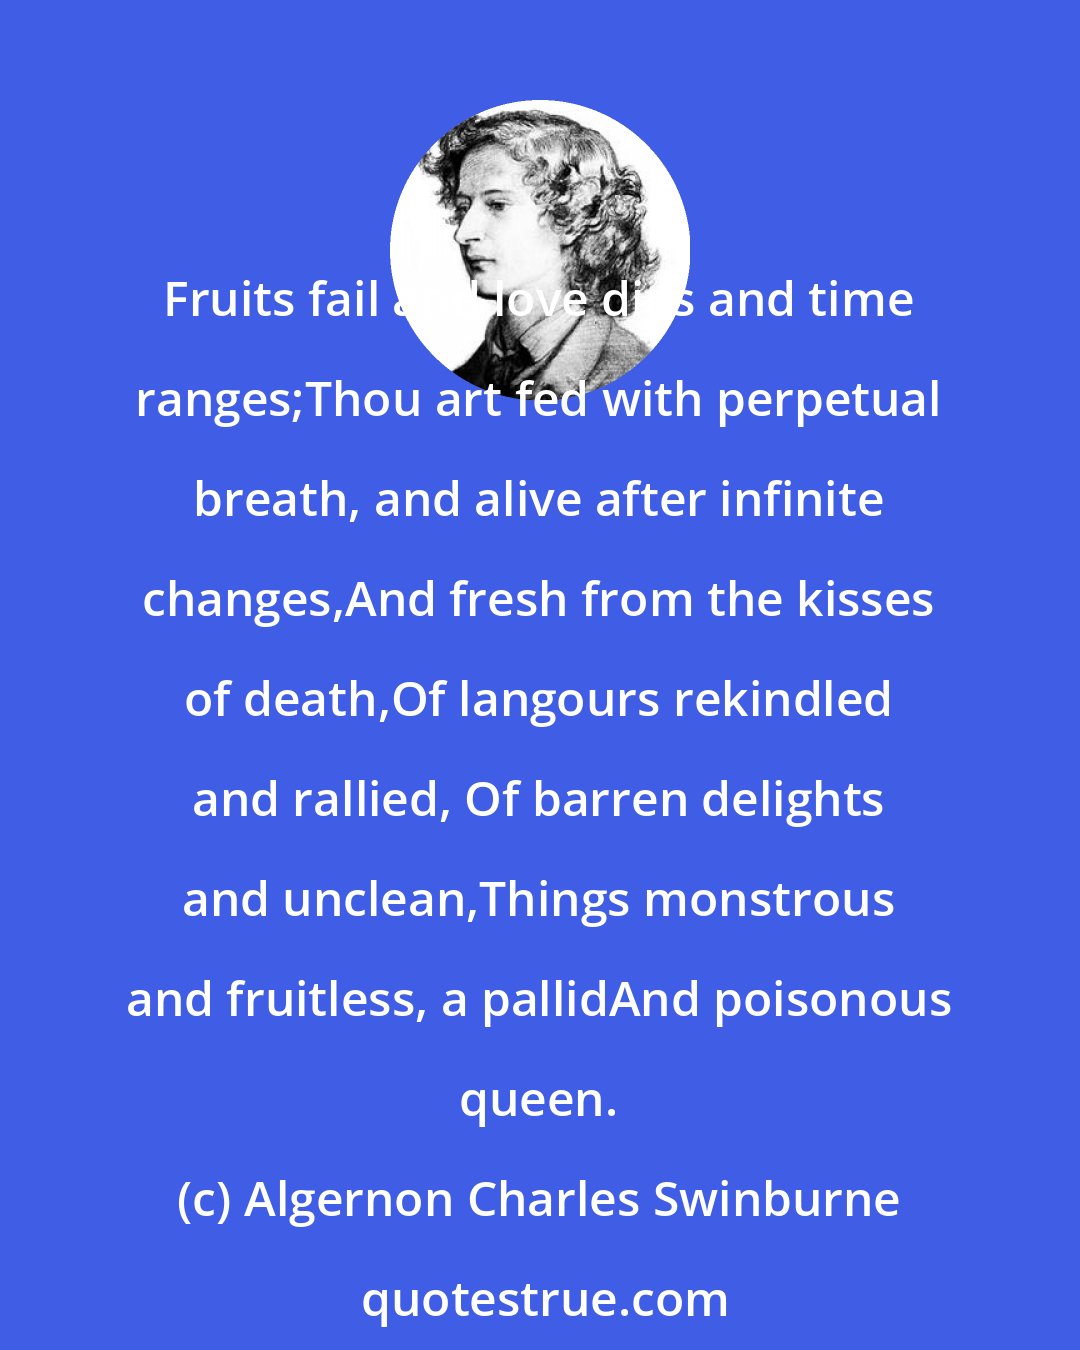 Algernon Charles Swinburne: Fruits fail and love dies and time ranges;Thou art fed with perpetual breath, and alive after infinite changes,And fresh from the kisses of death,Of langours rekindled and rallied, Of barren delights and unclean,Things monstrous and fruitless, a pallidAnd poisonous queen.